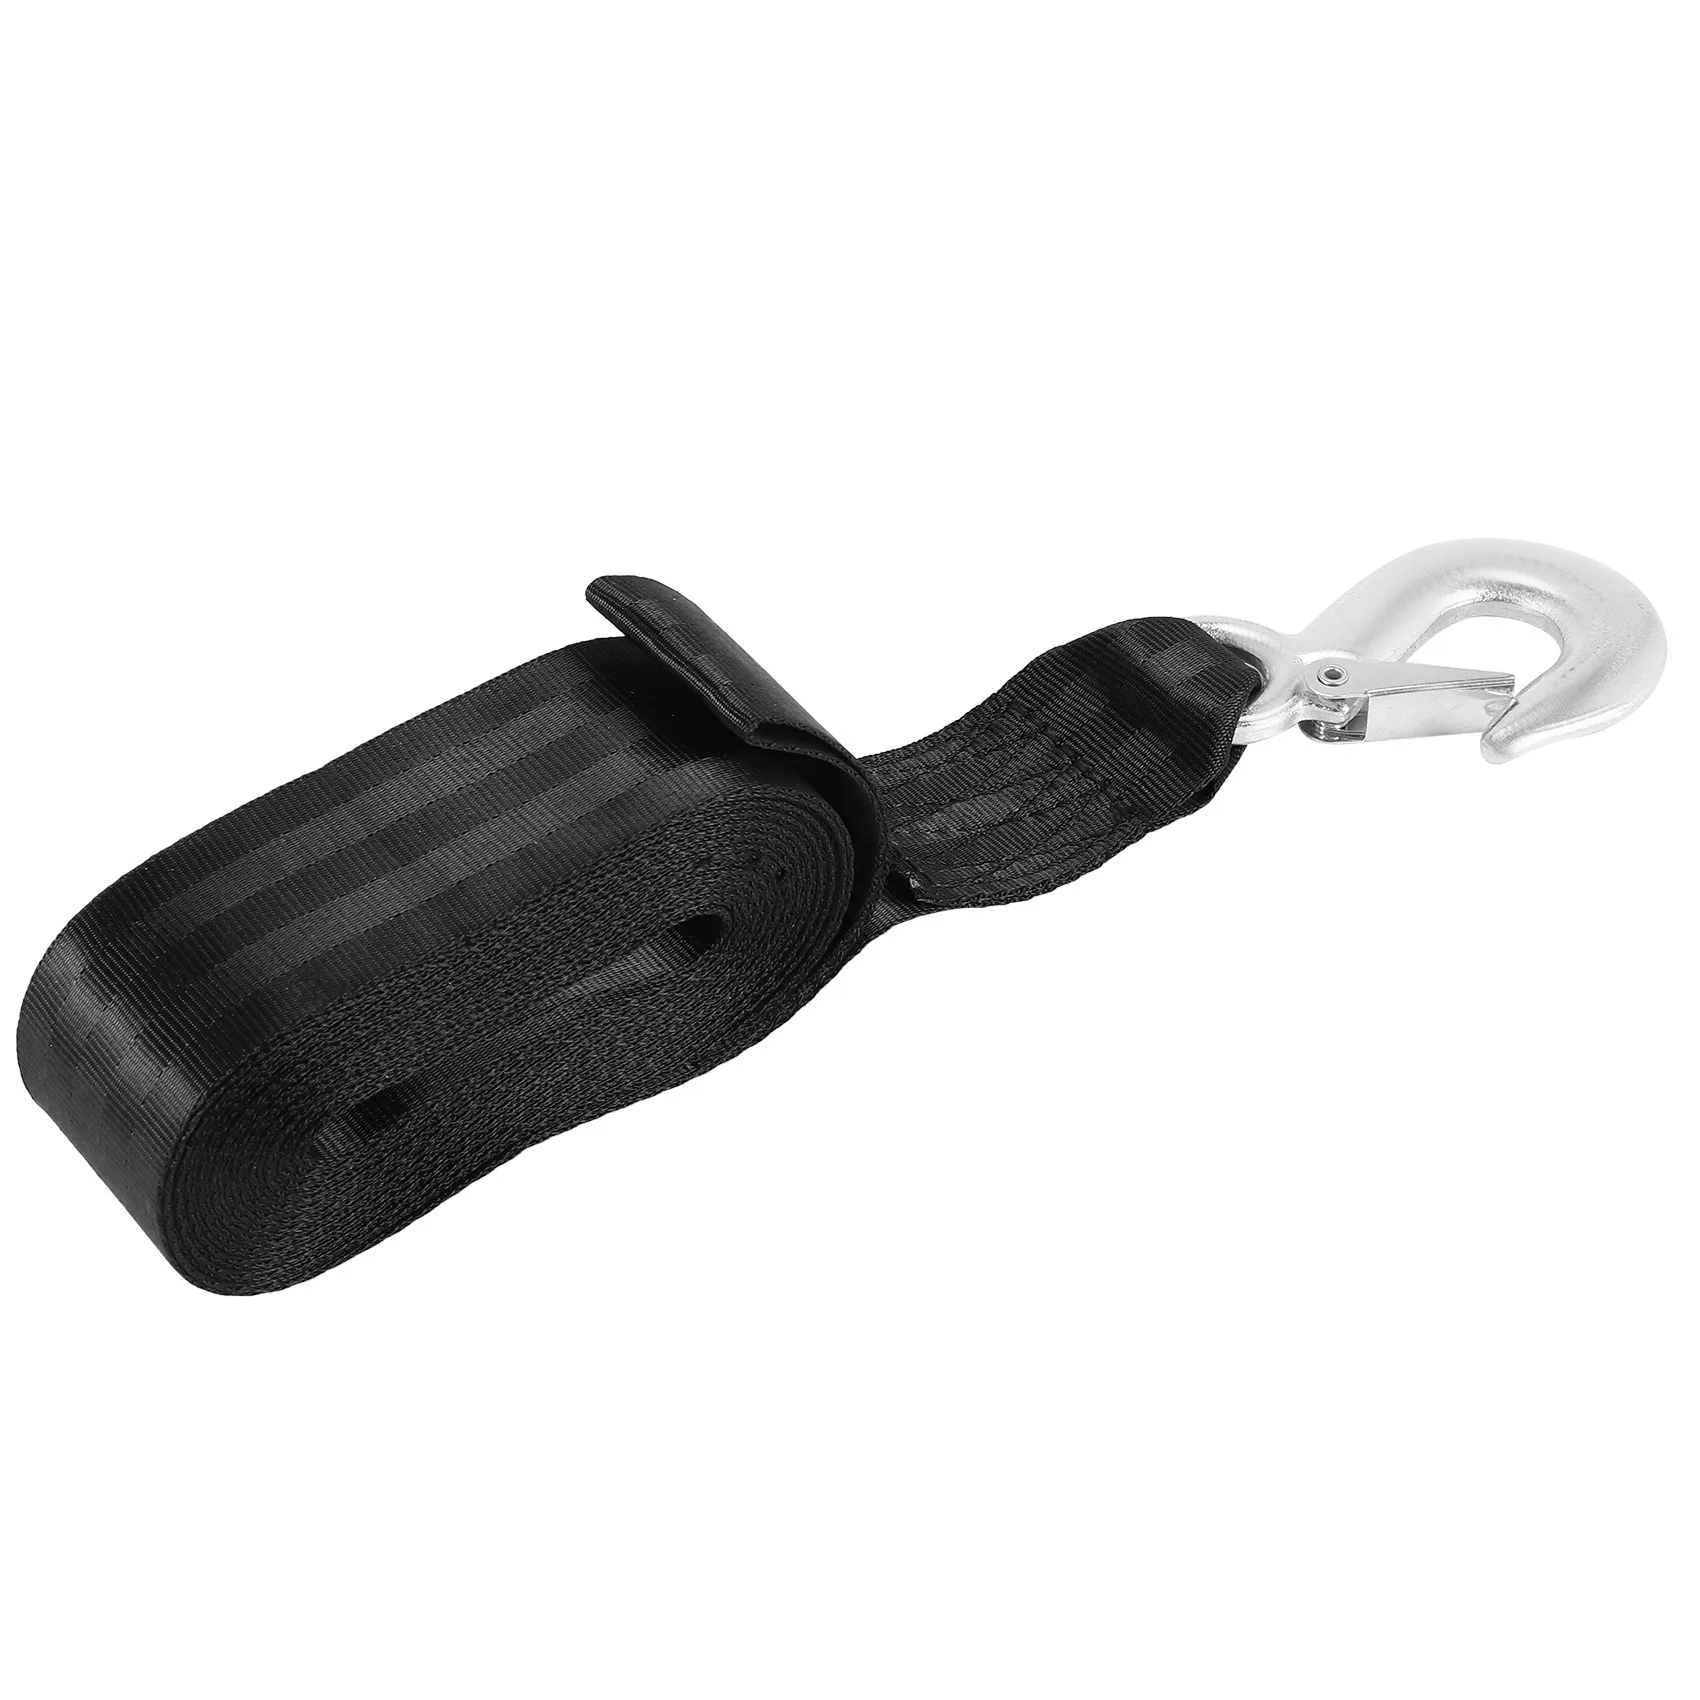 

Boat Trailer Winch Strap Replacement with Hook for Boat, Fishing Jet Ski,Towing Replacement Securing Tie Down Marine